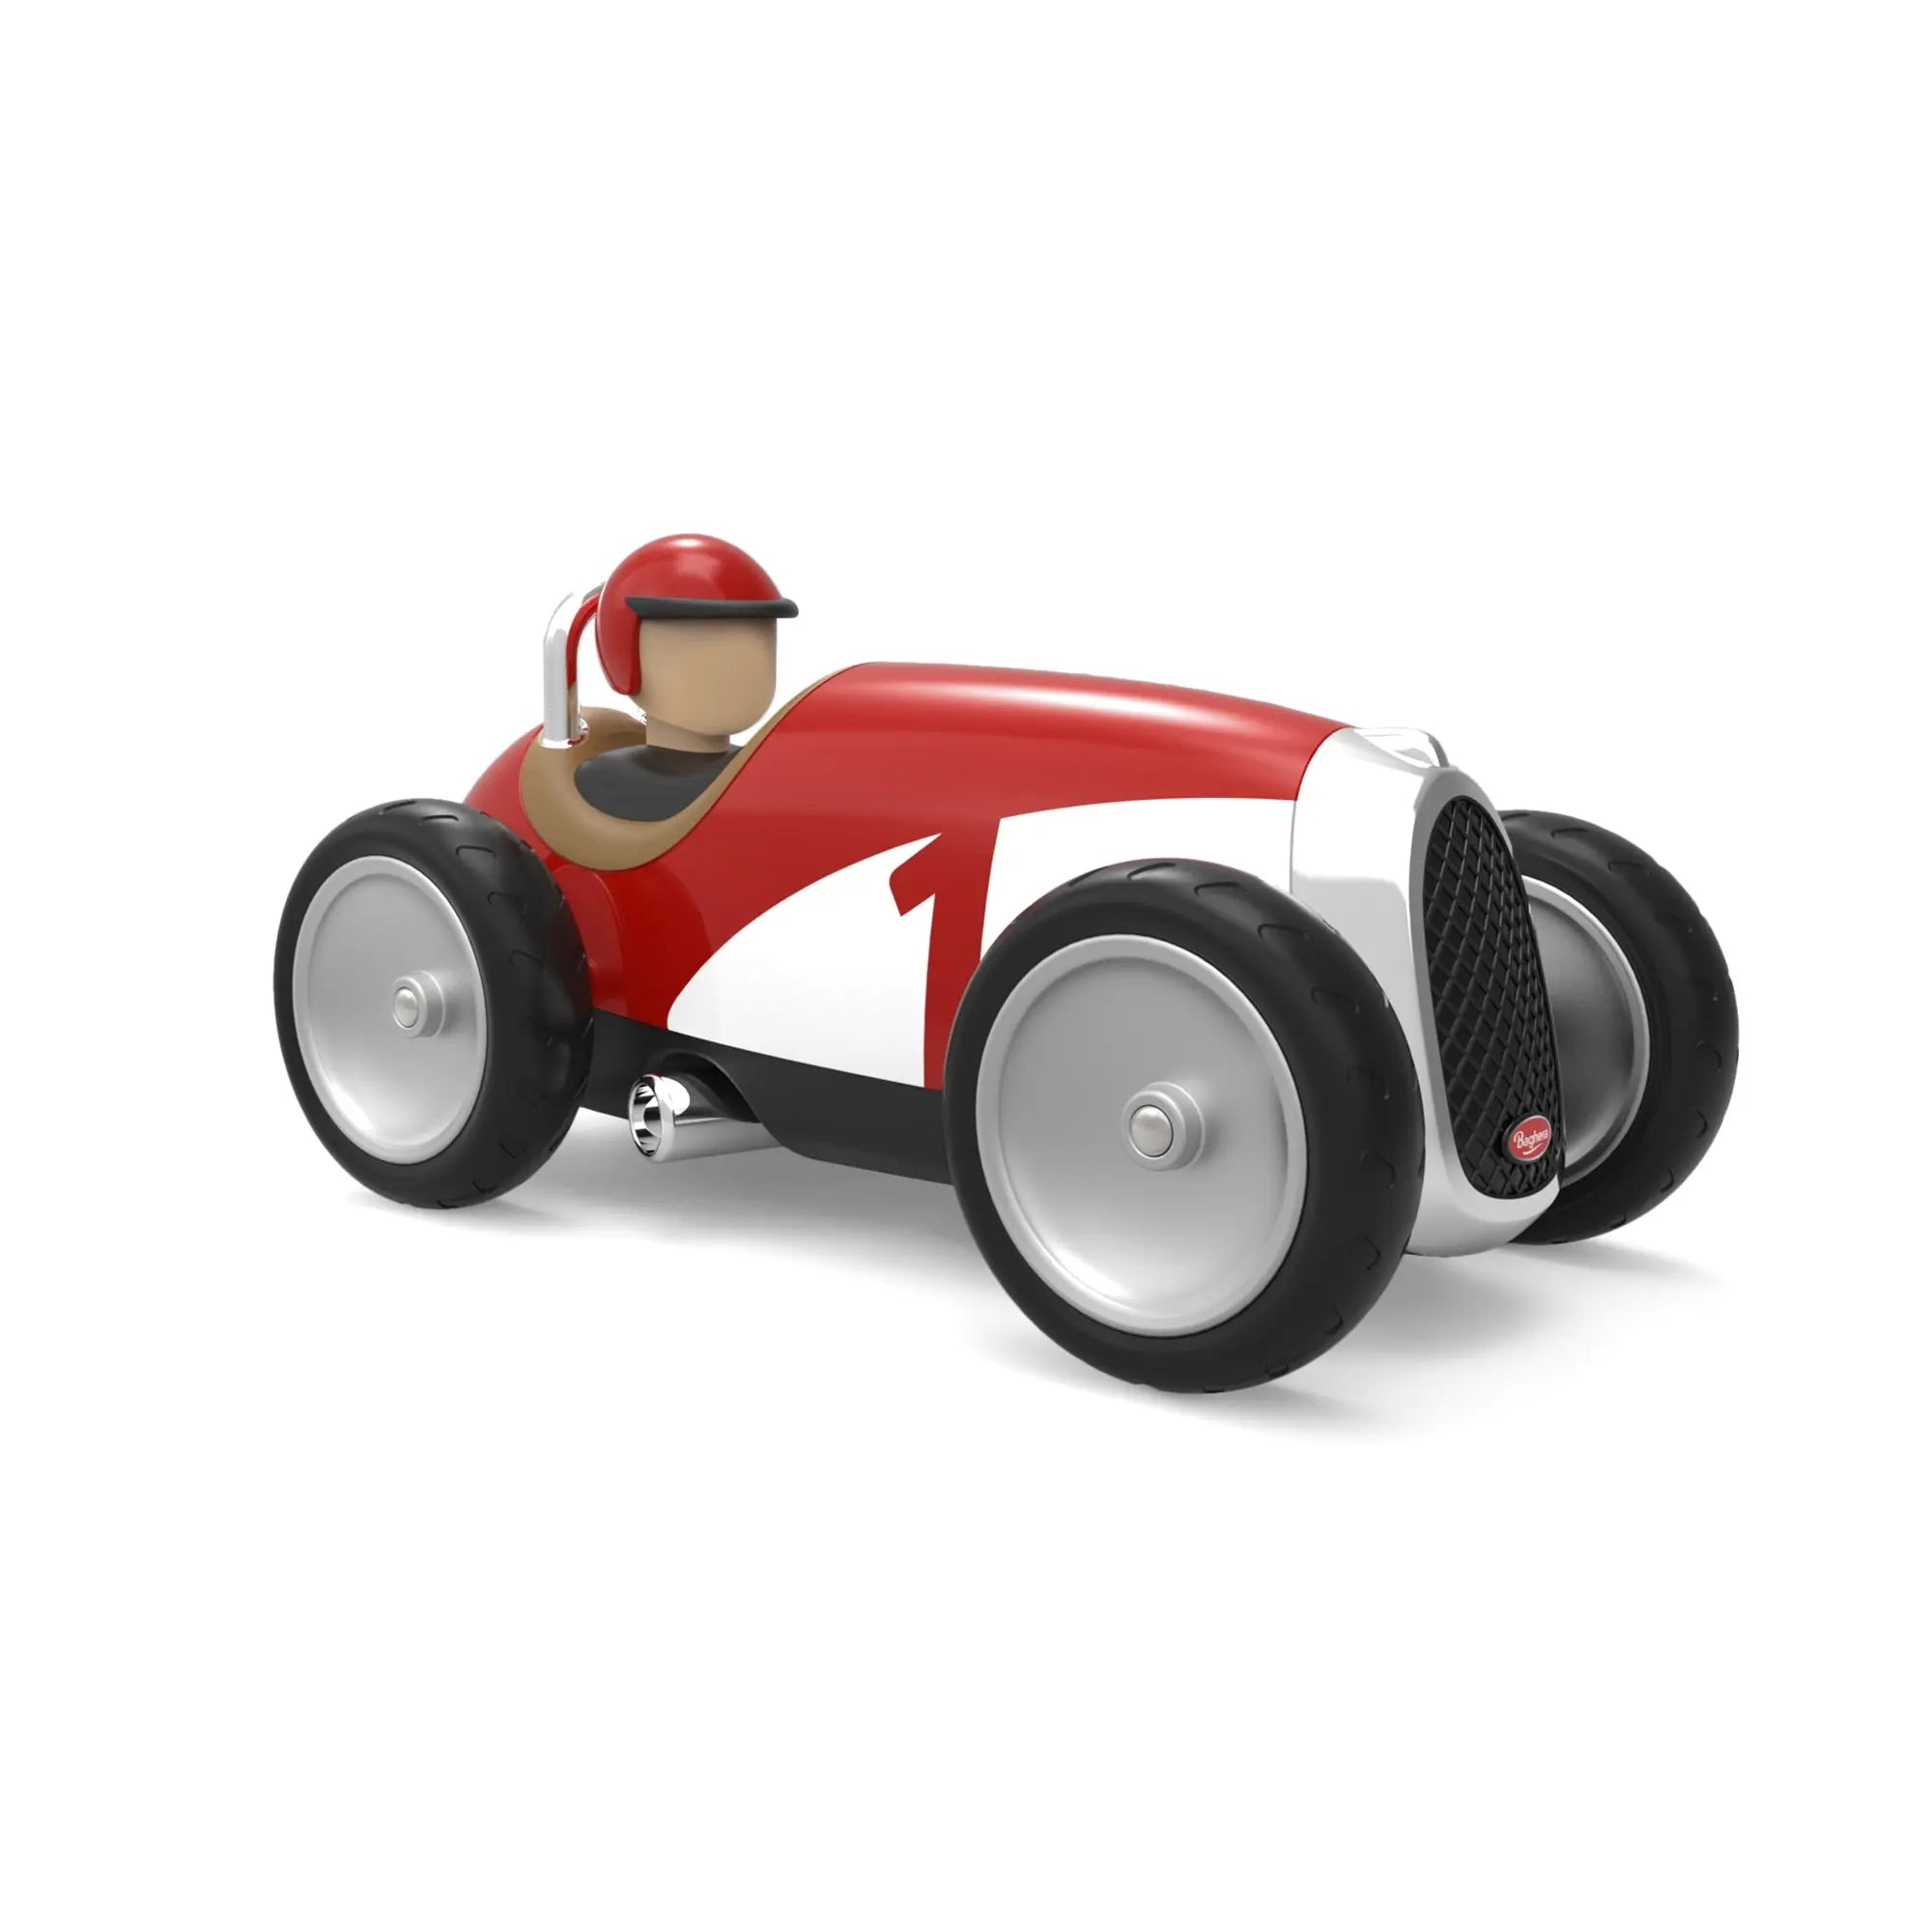 Vintage Car Racing Car Toy, Durable Plastic Model, Racing Car Toy, Playful Gift for Kids, Toy Car Gift  Baghera Red  